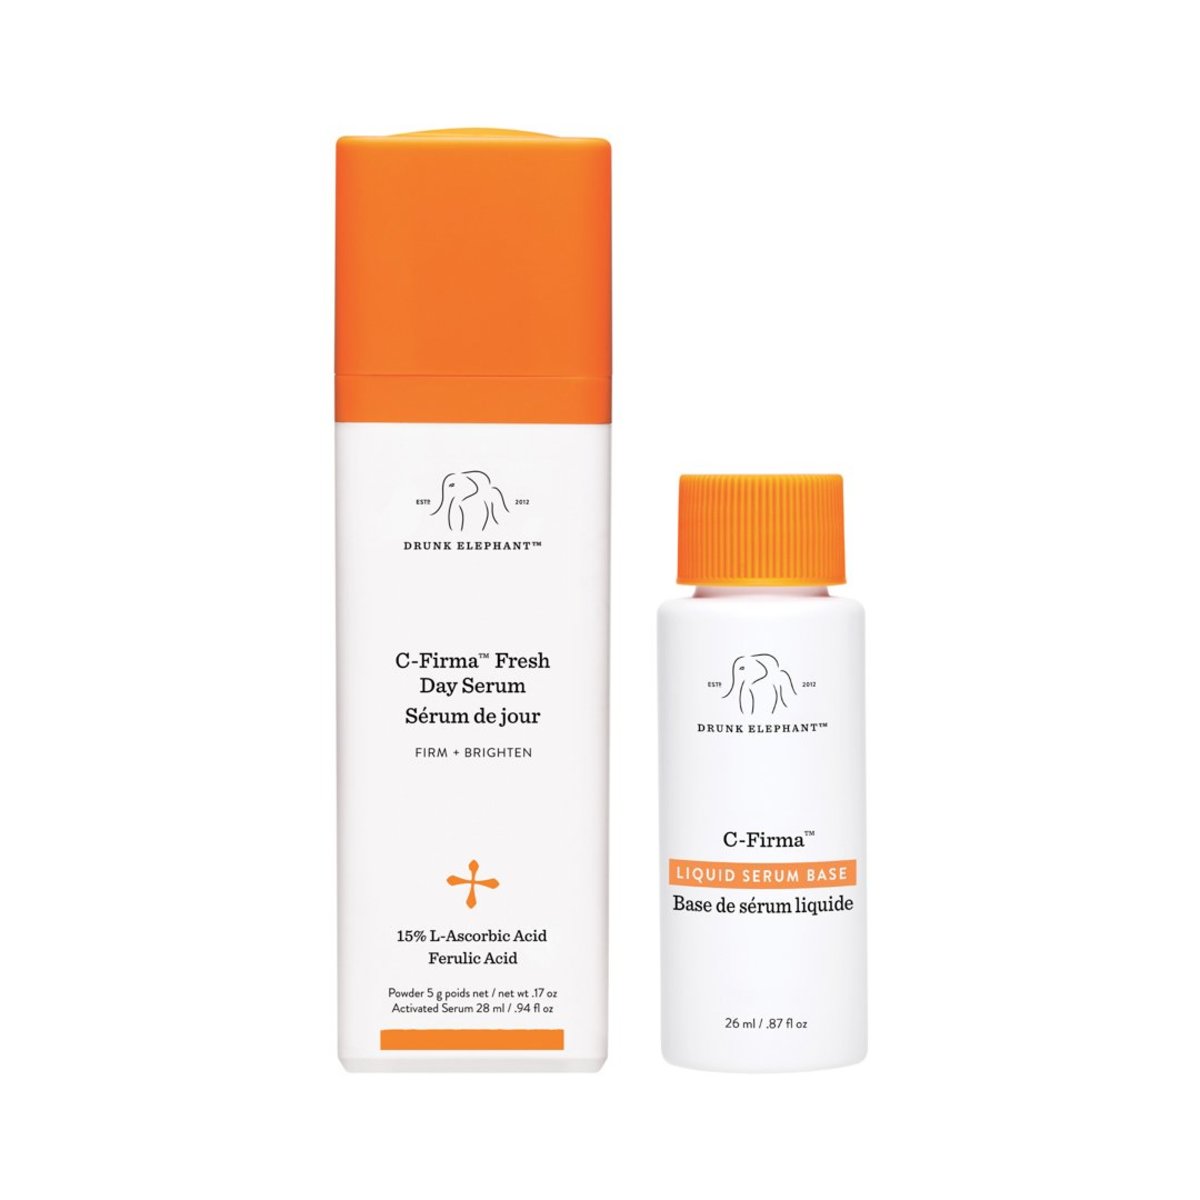 Drunk Elephant C-Firma Fresh Day Serum, $78, available here.